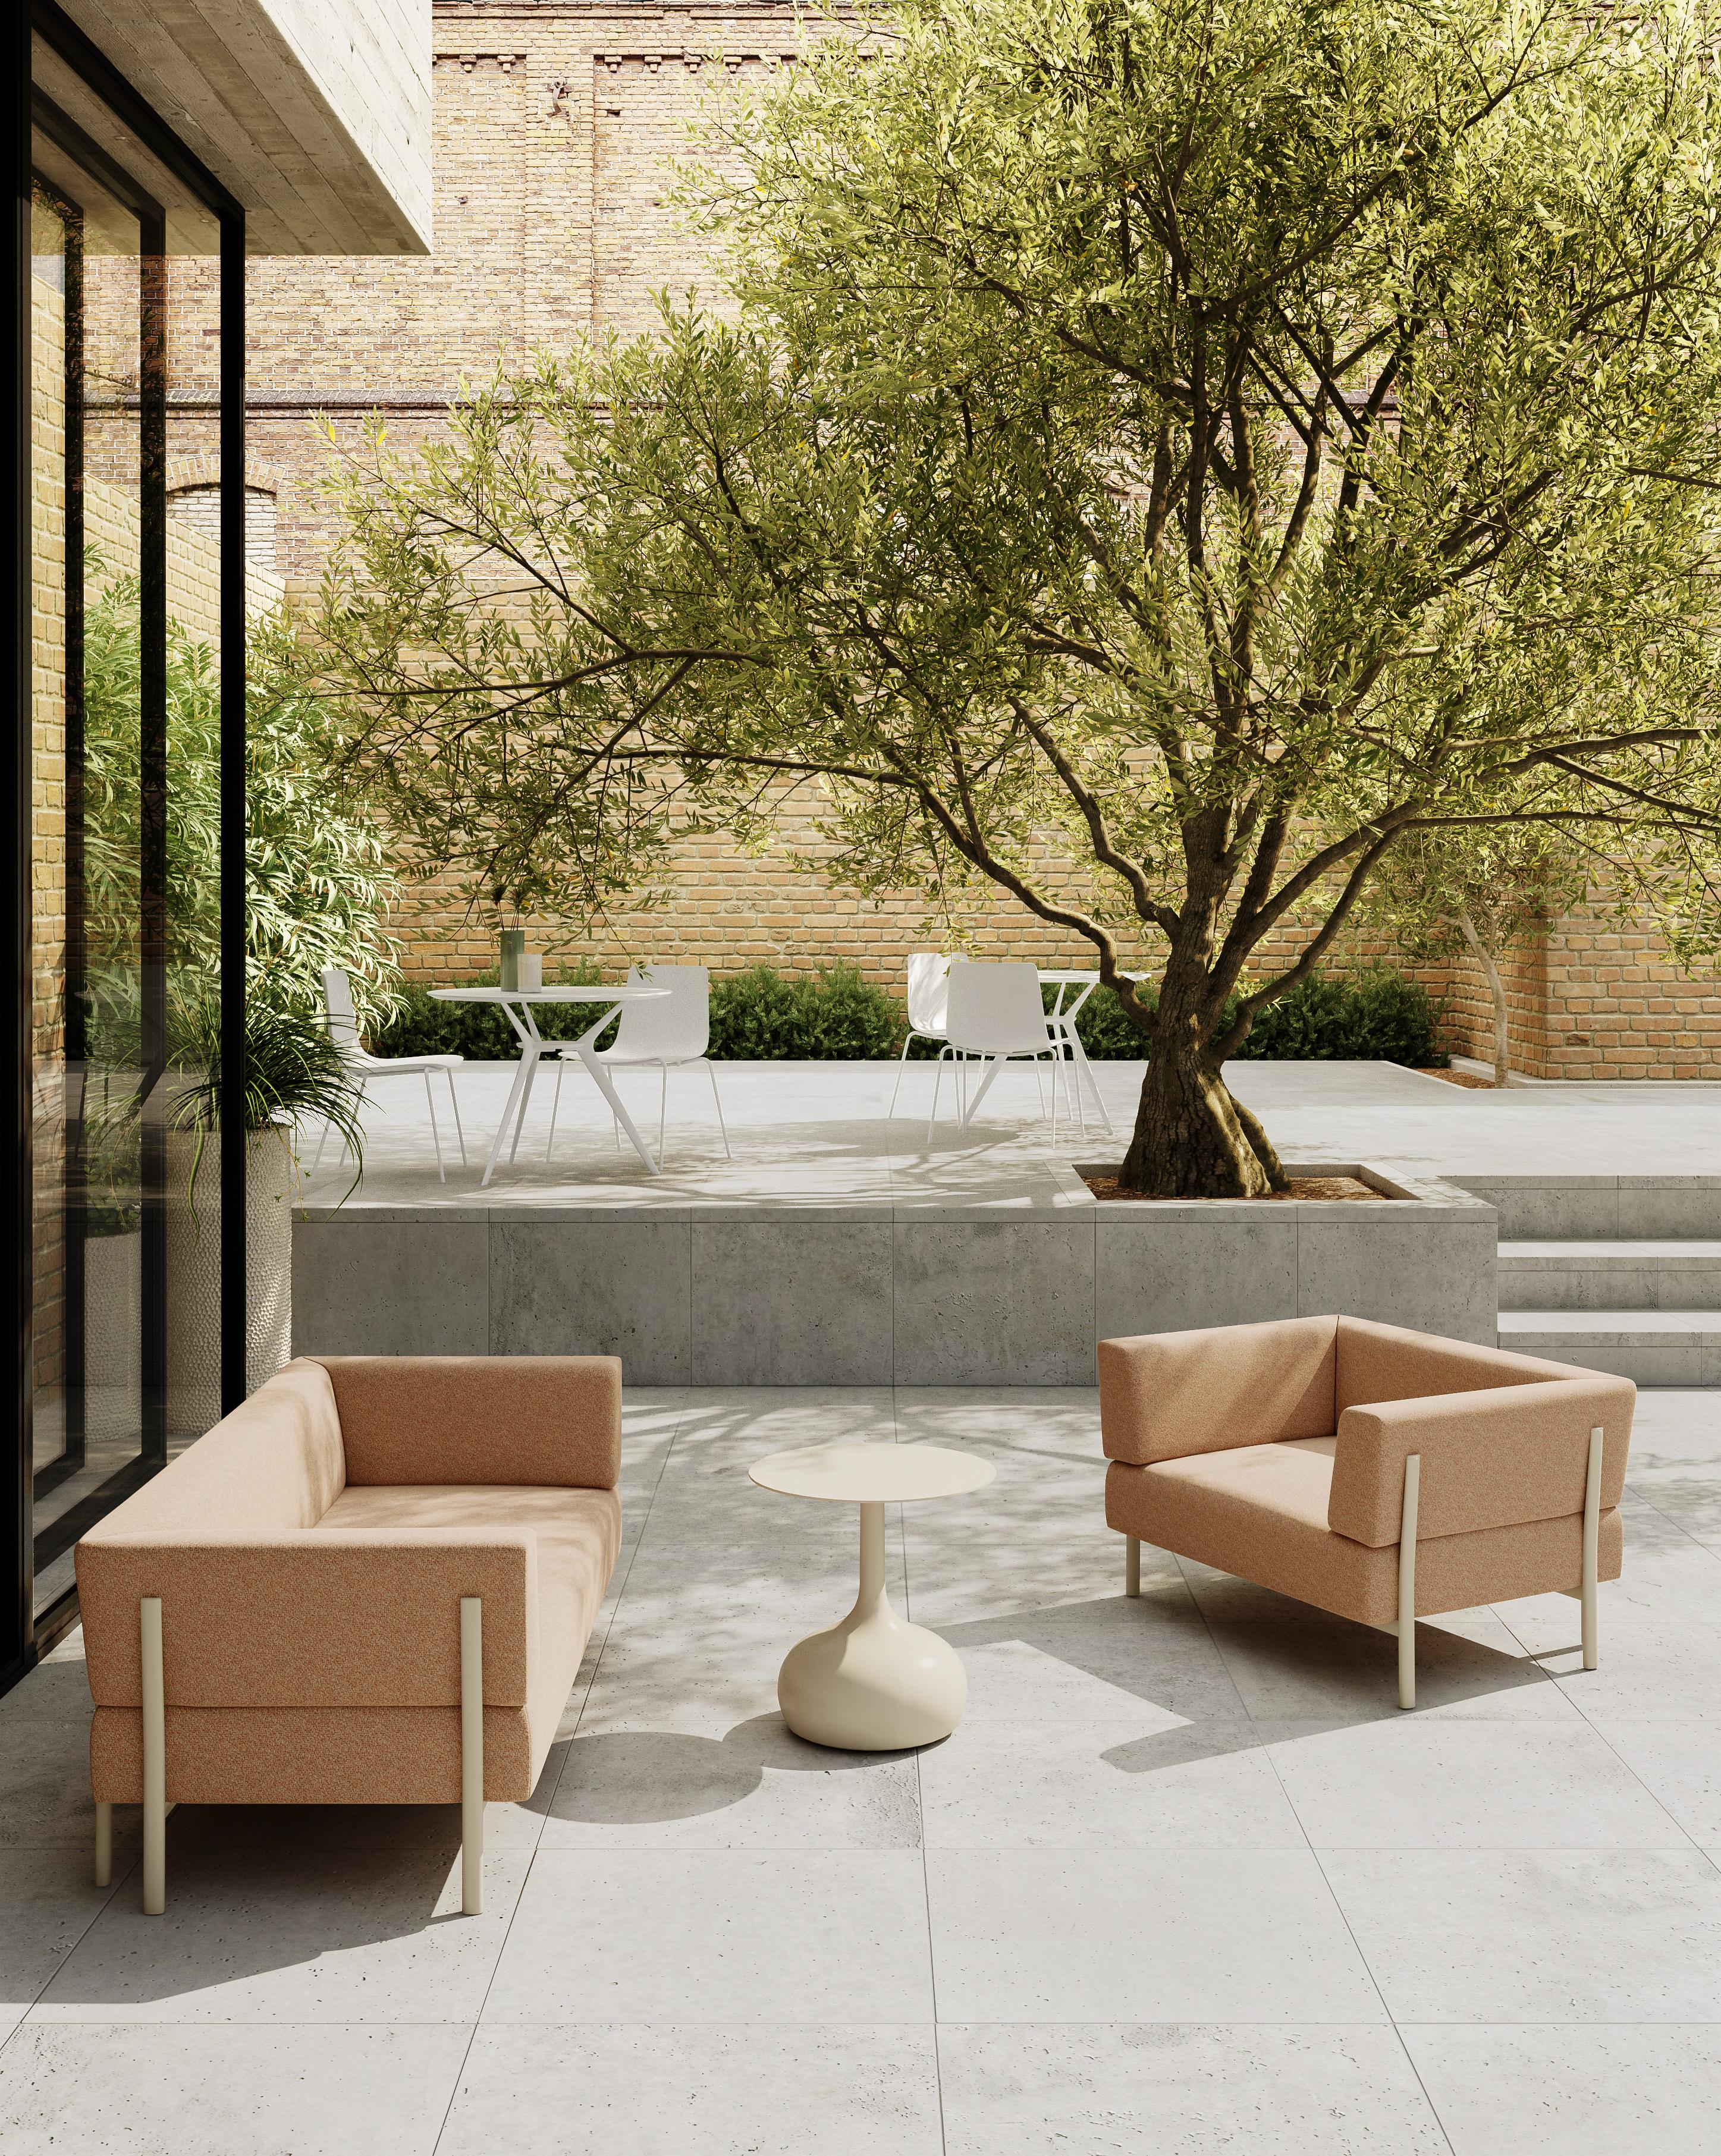 Alias T02_O Ten 2 Seater Outdoor Sofa in White and Sand Lacquered Aluminum Frame by PearsonLloyd

Two-seater sofa for outdoor use with lacquered die-cast aluminium legs and stainless steel frame.Seat, back and armrests with removable cover in